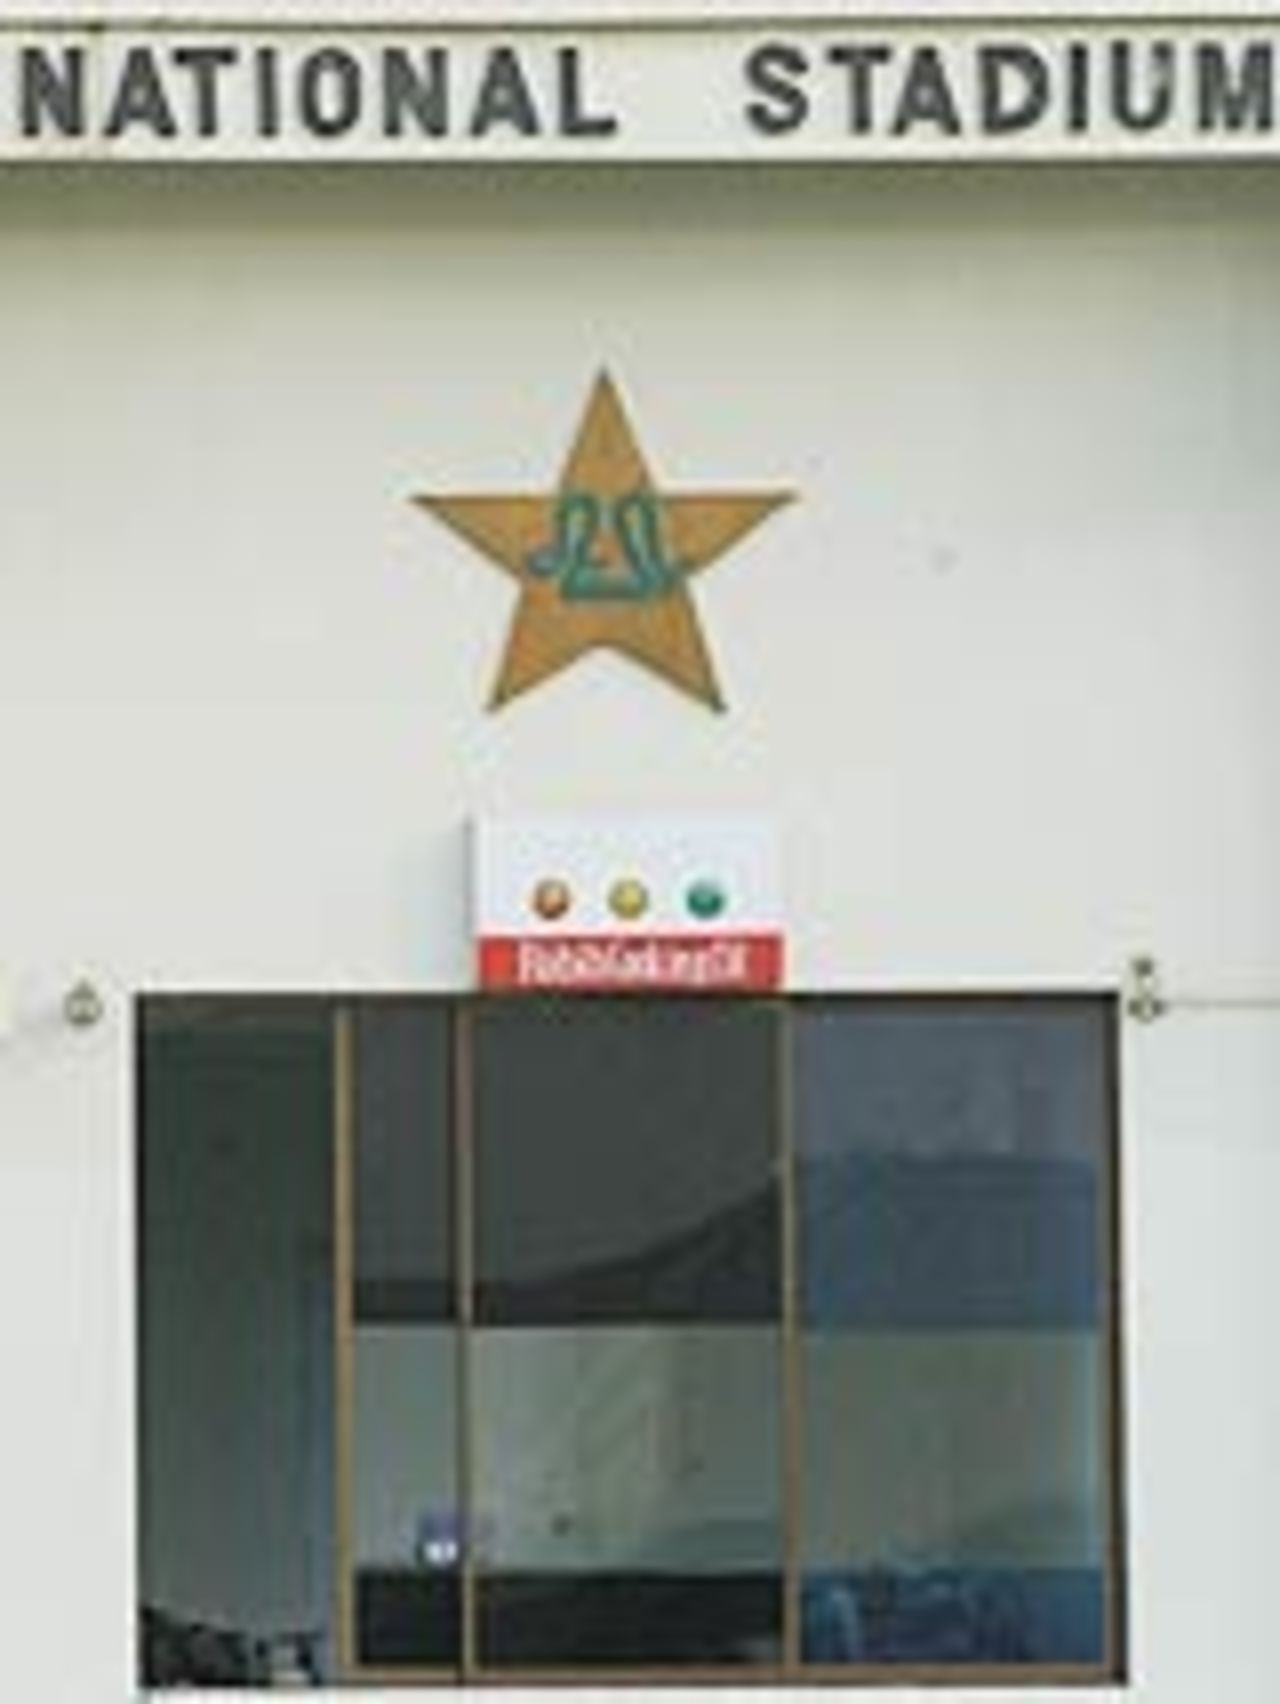 A view of the National Stadium in Karachi, September 20, 2003